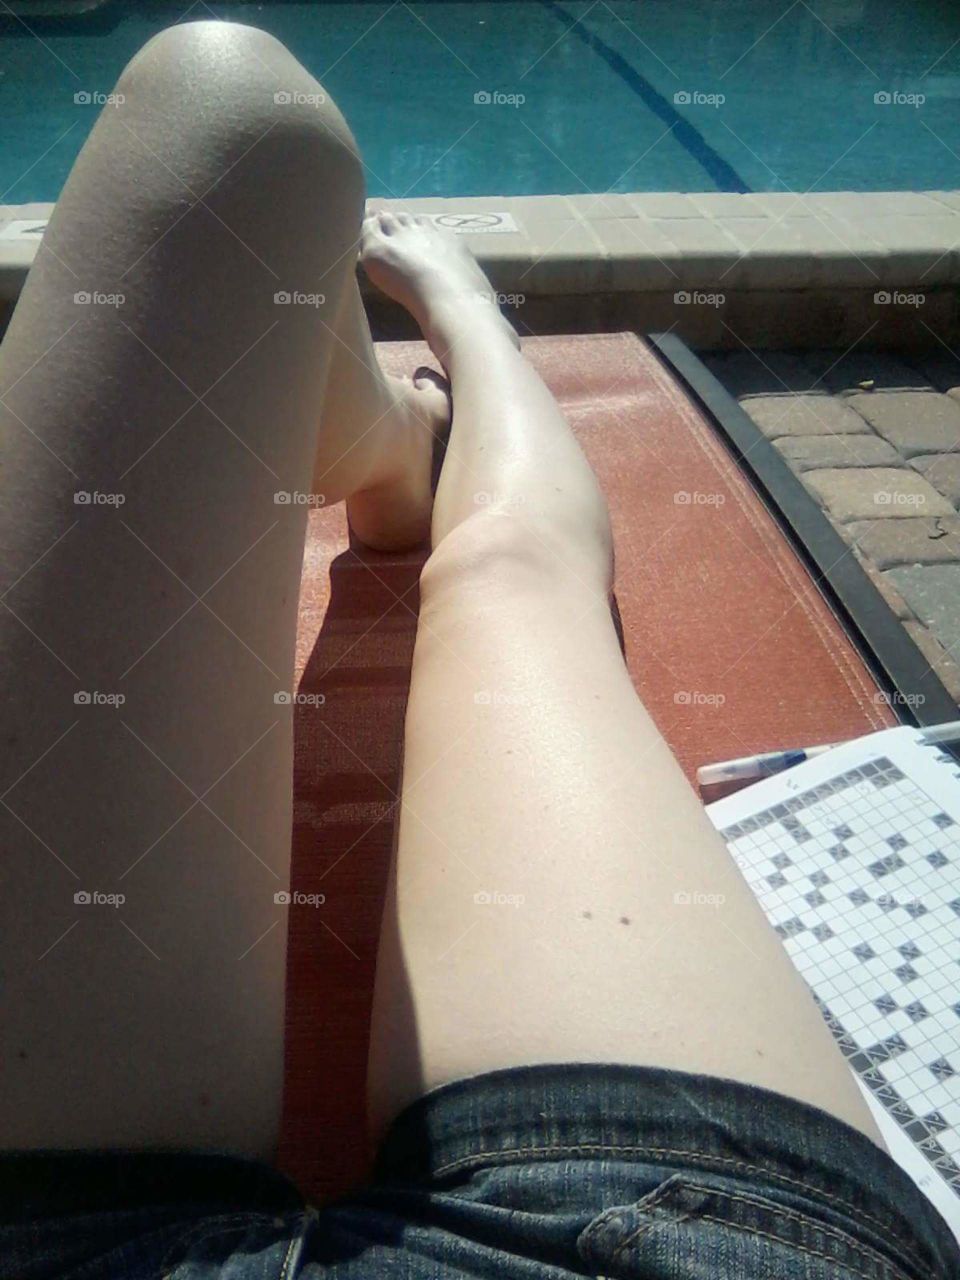 At the pool with a puzzle